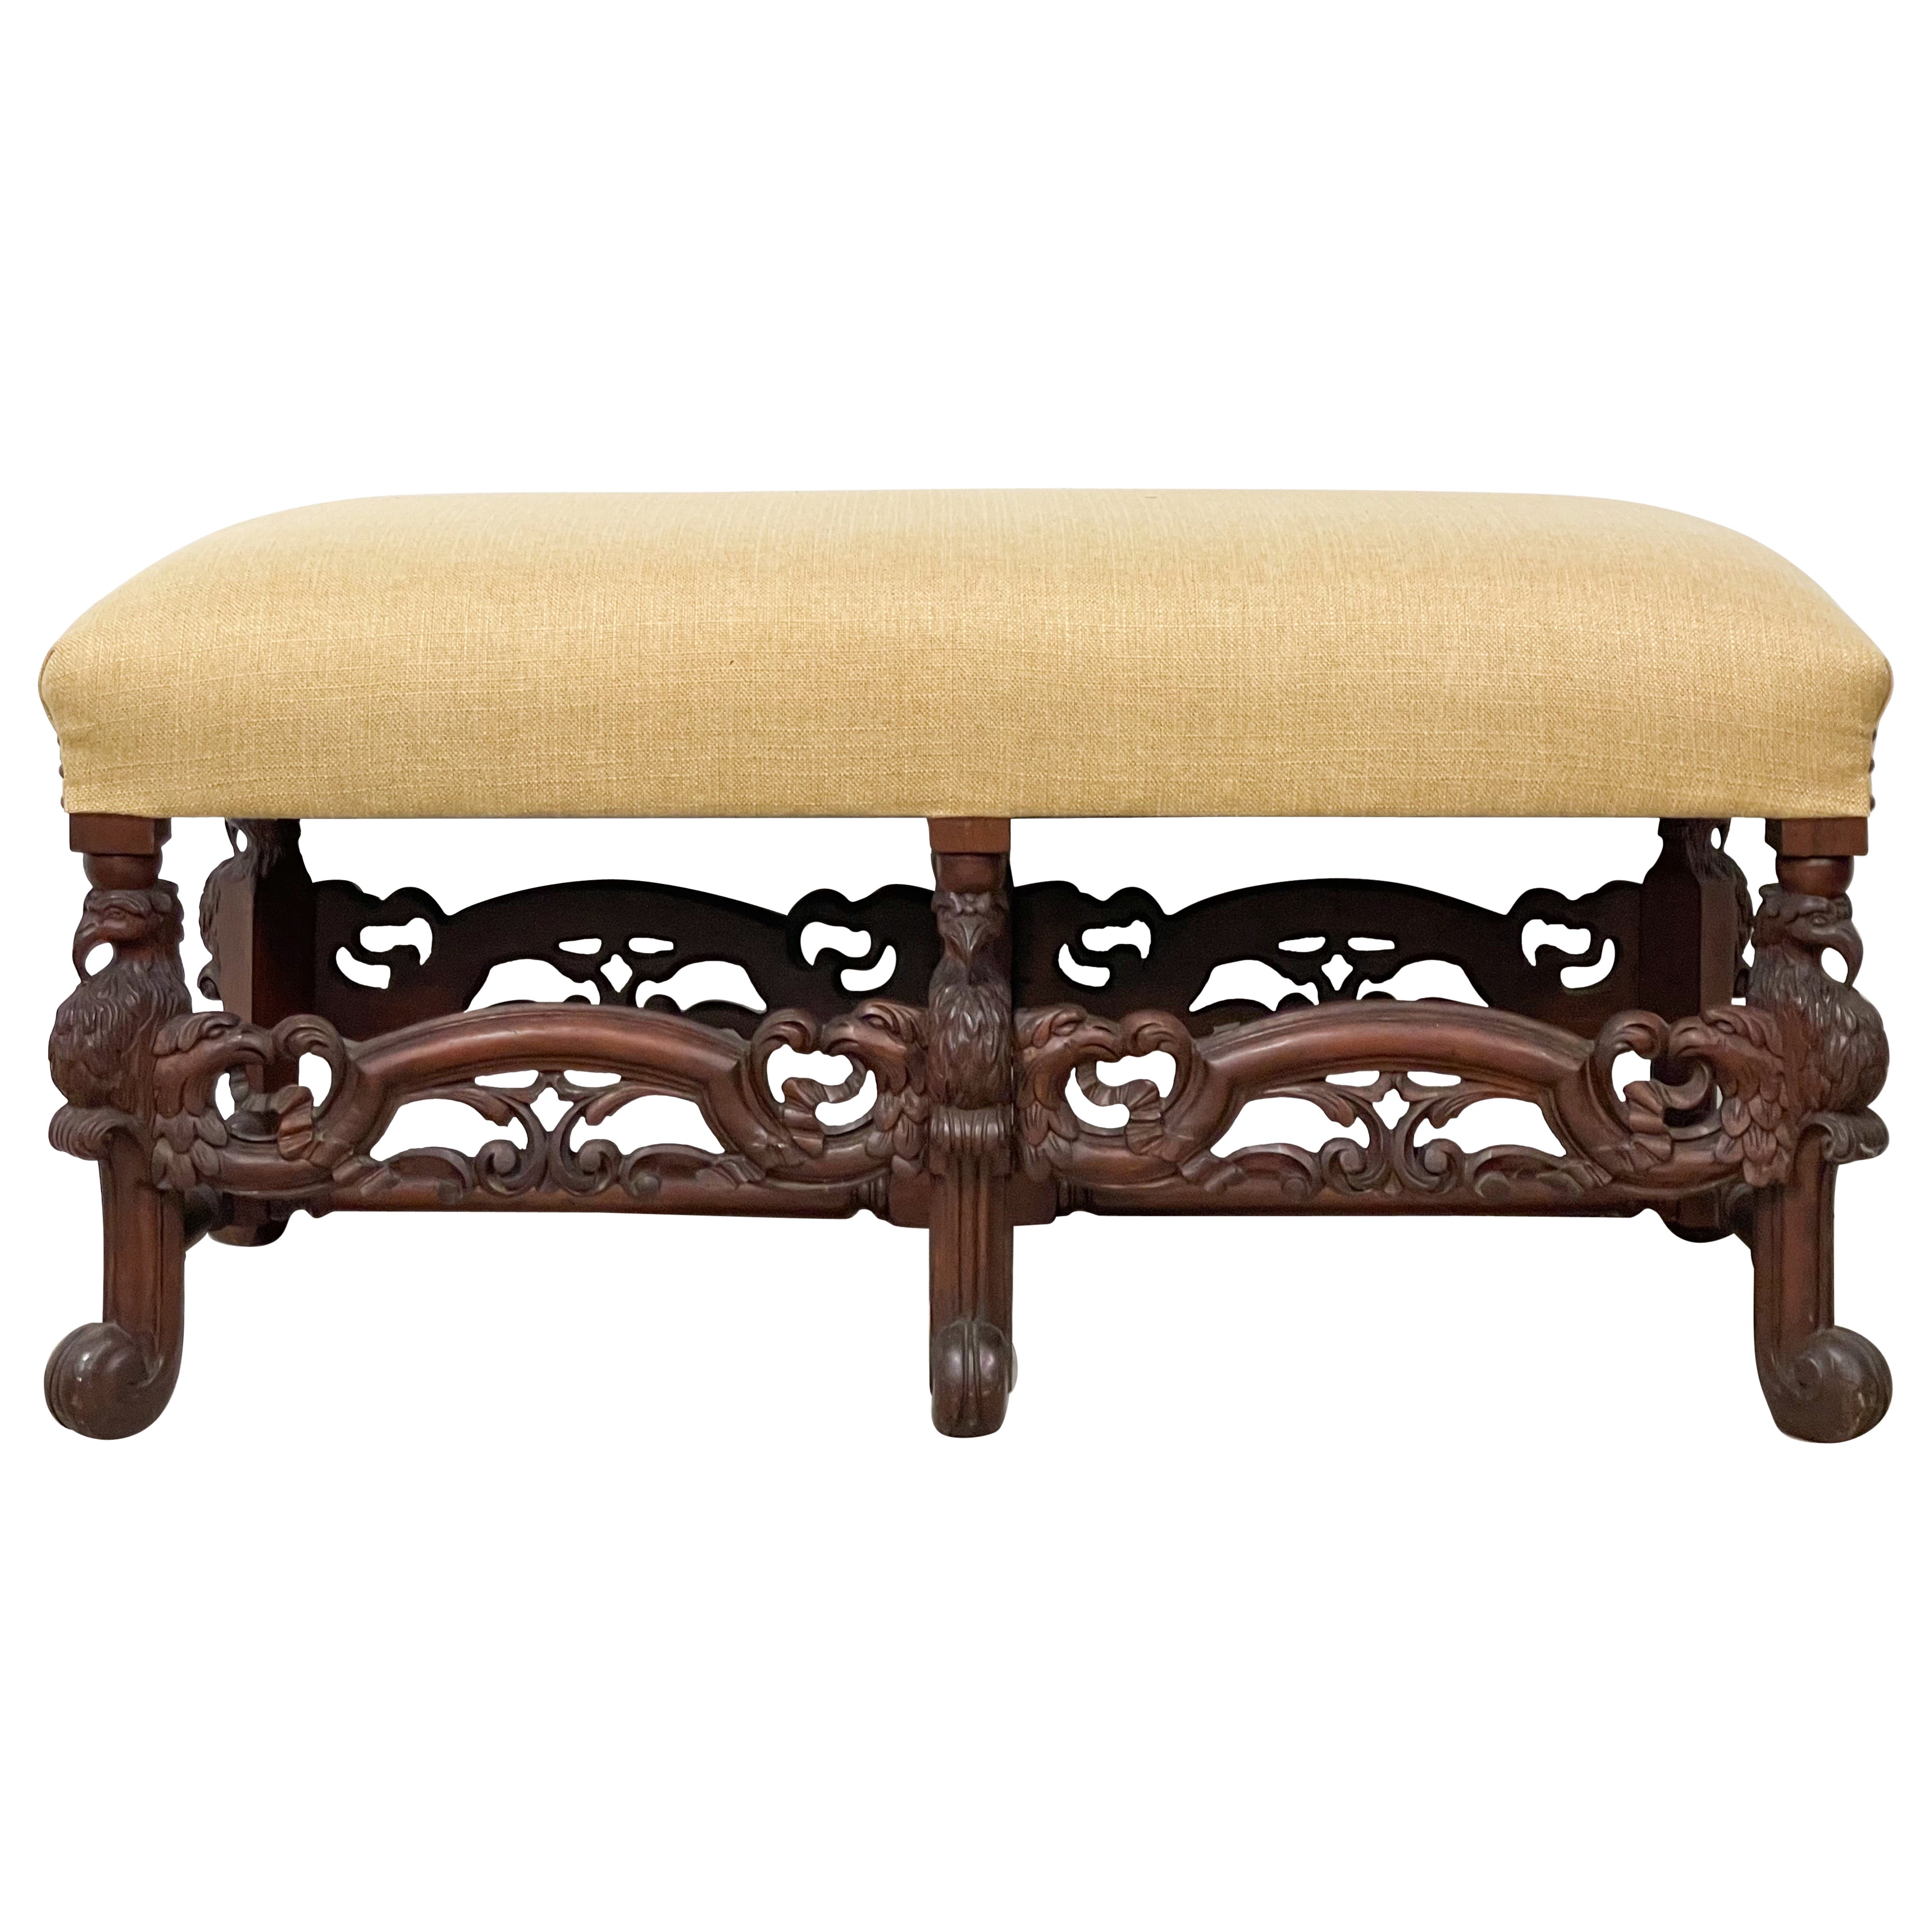 Early 20th-C. Neo-Classical Style Carved Mahogany Bench with Eagles For Sale